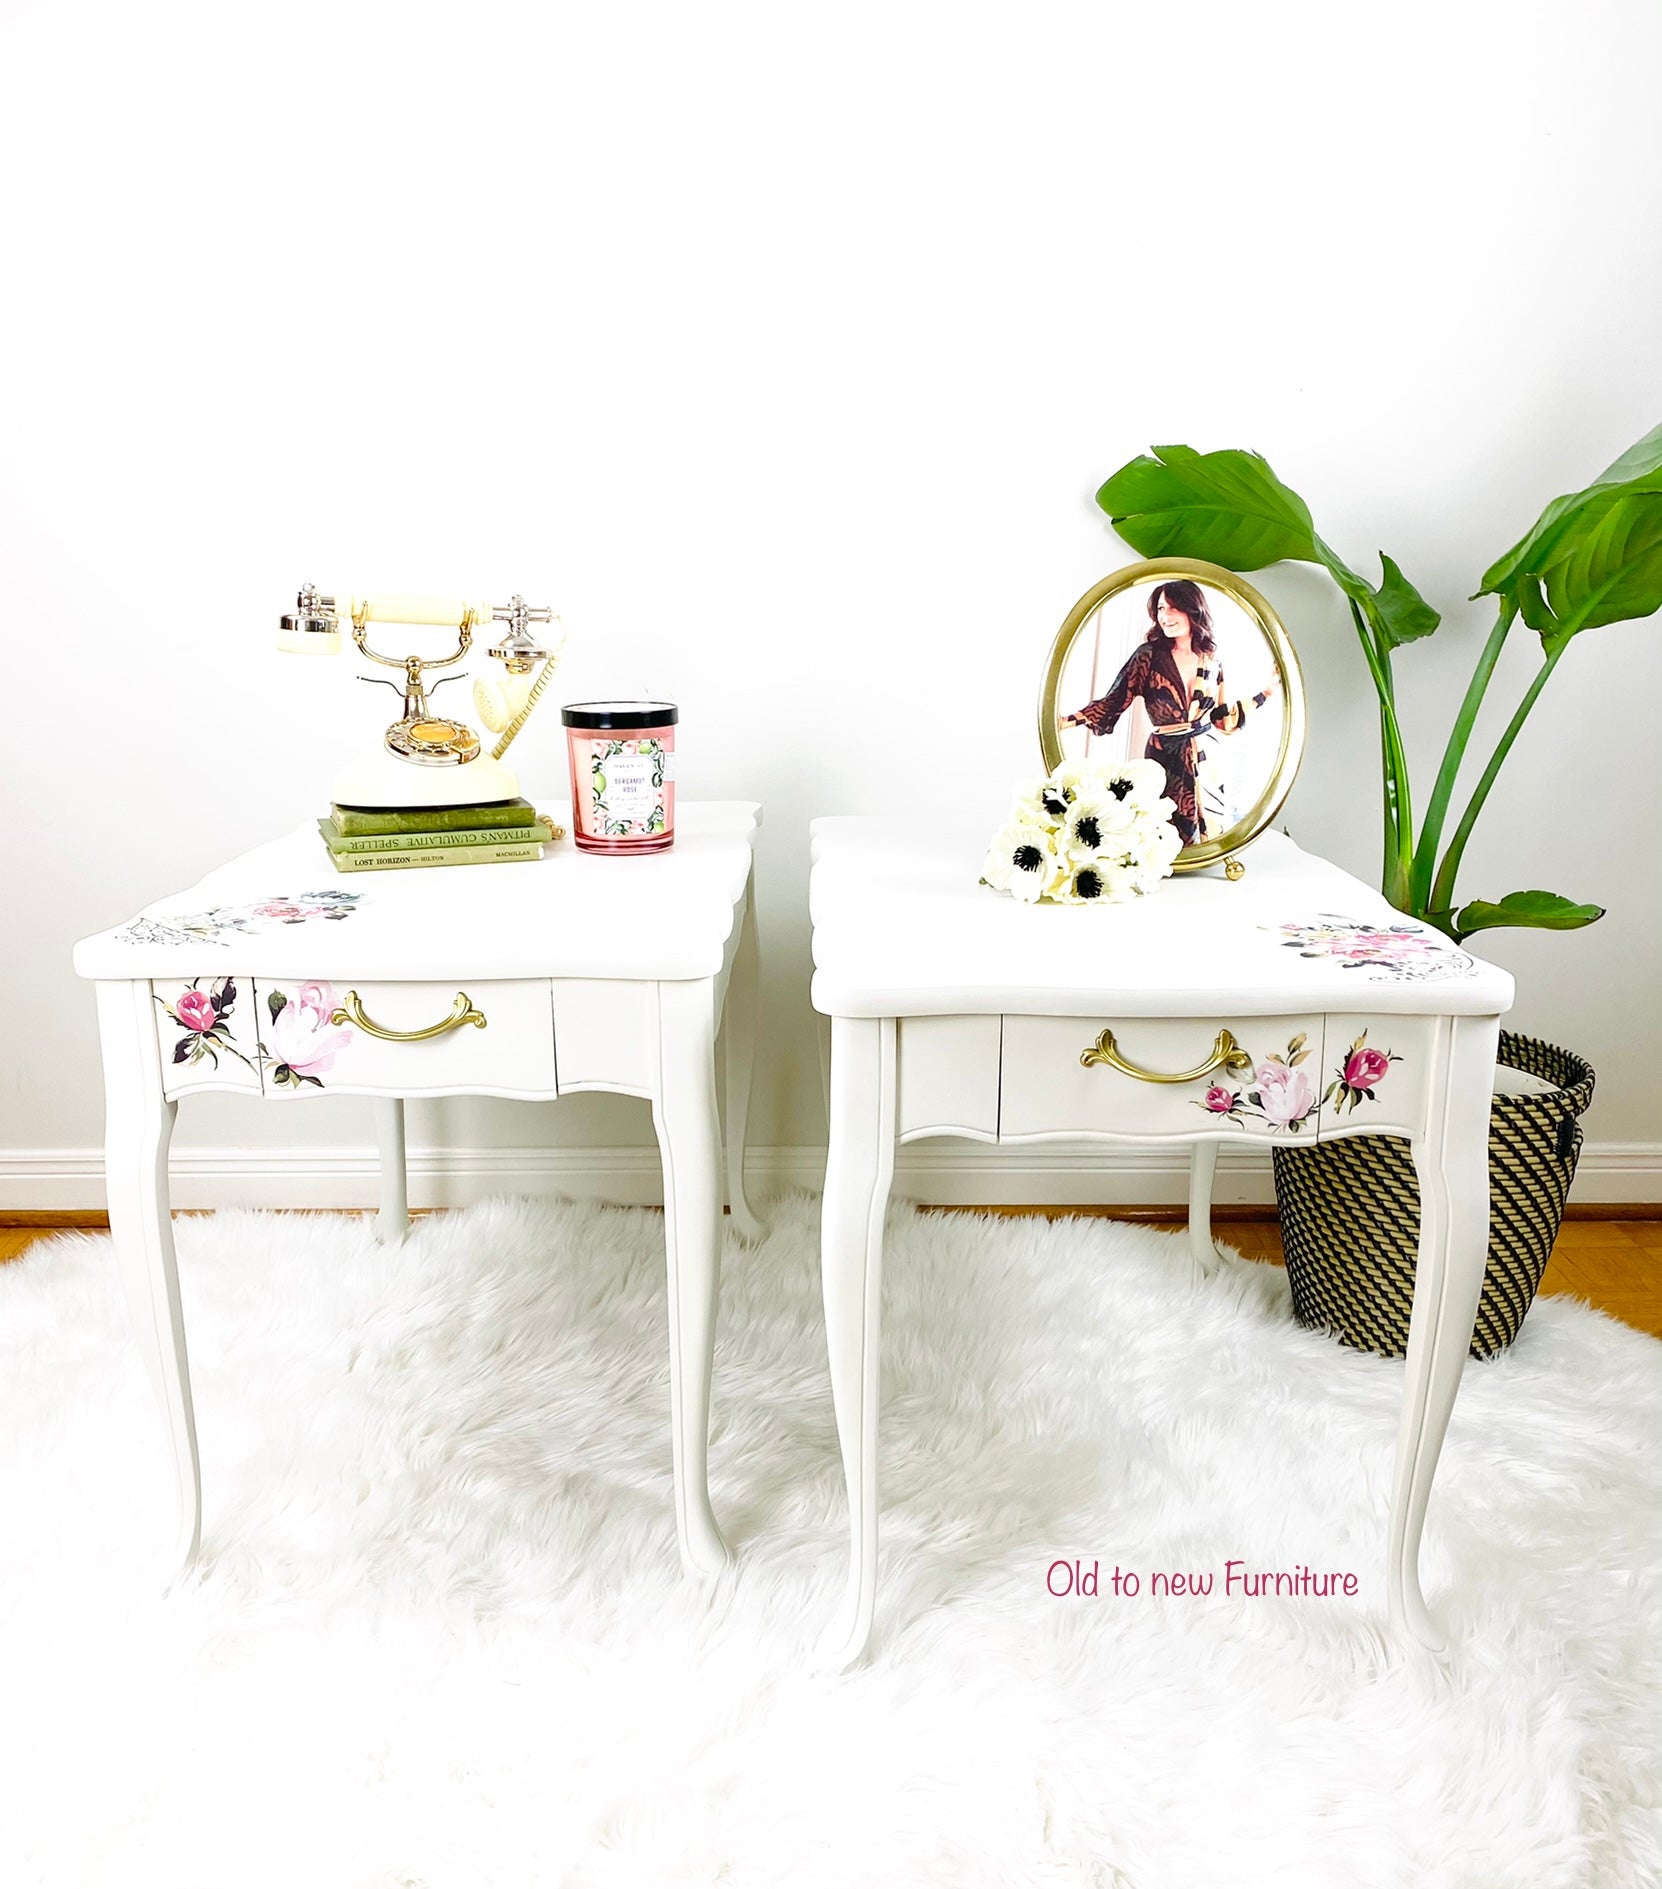 Antique White French Provincial End Tables Painted With Fusion Mineral Paint at oldtonewfurniture.ca